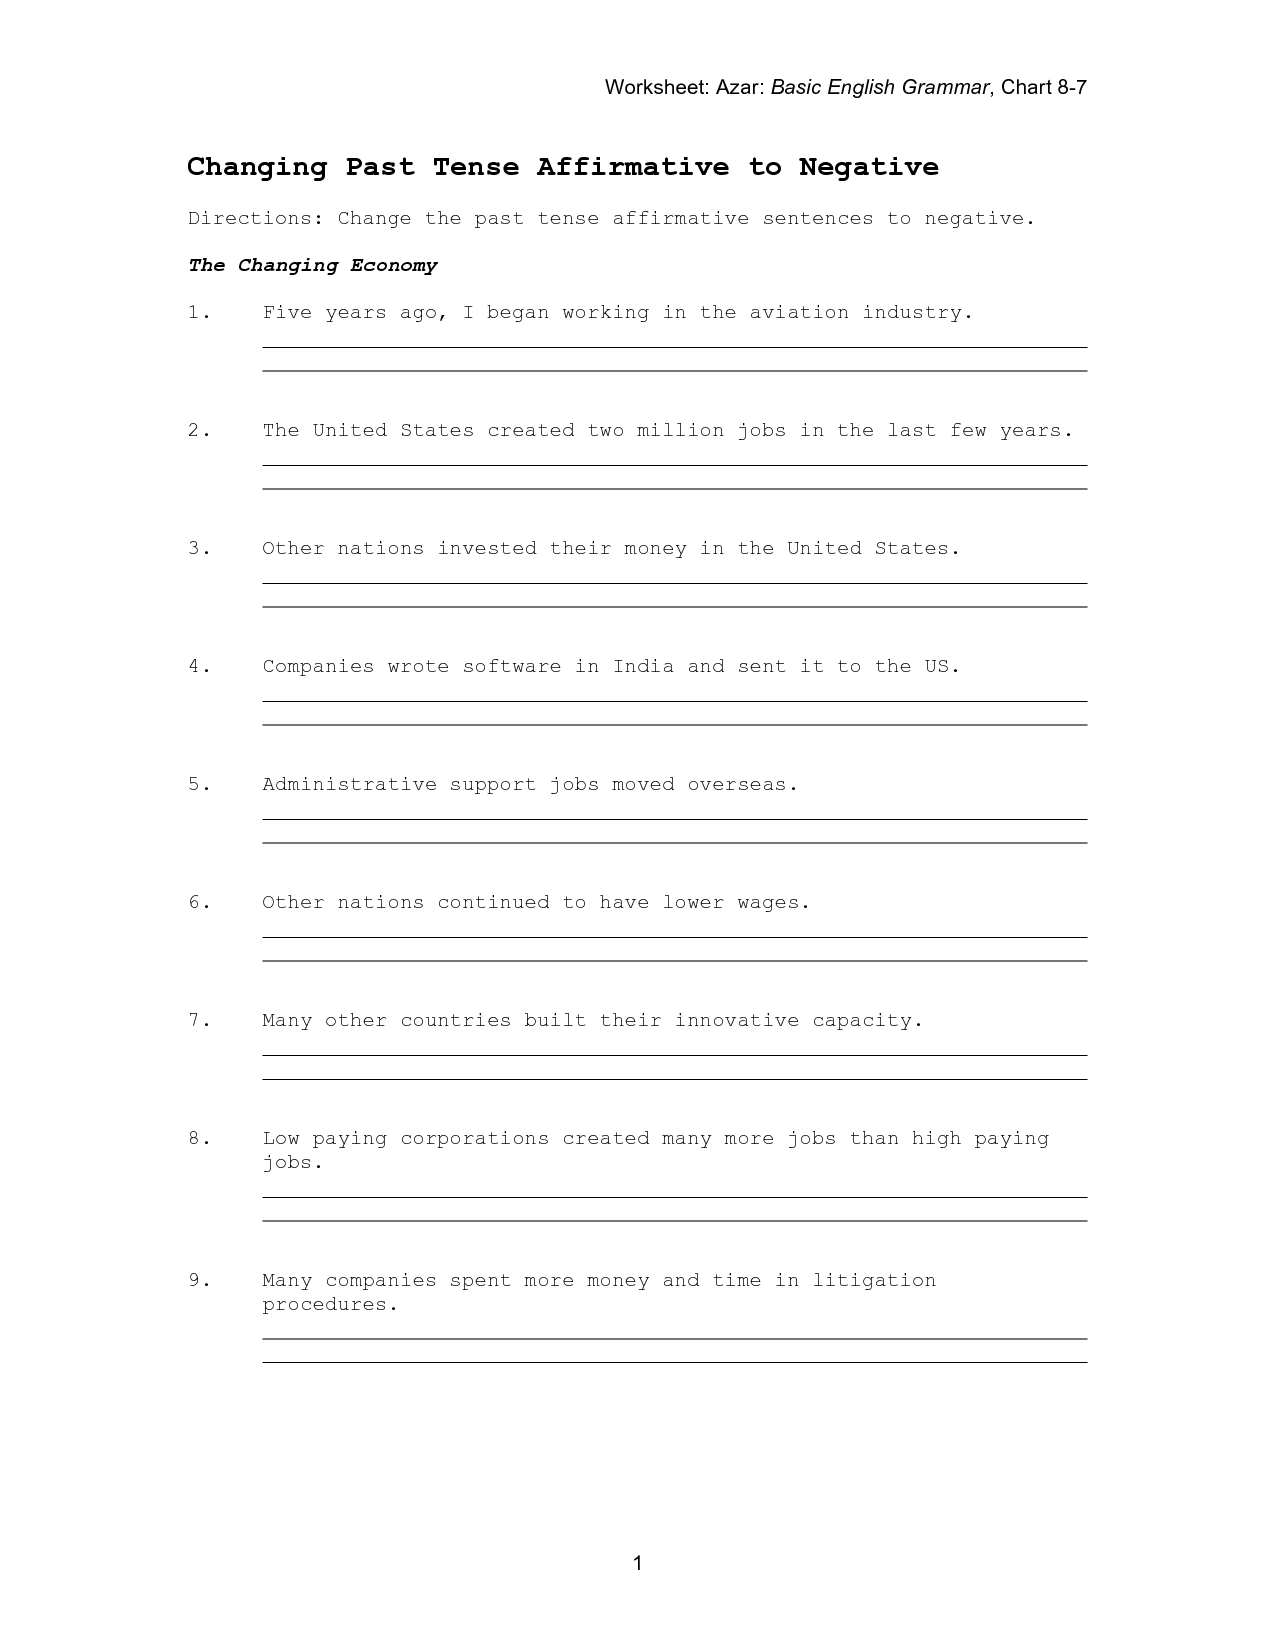 17-best-images-of-english-practice-worksheets-for-adults-free-cursive-writing-worksheets